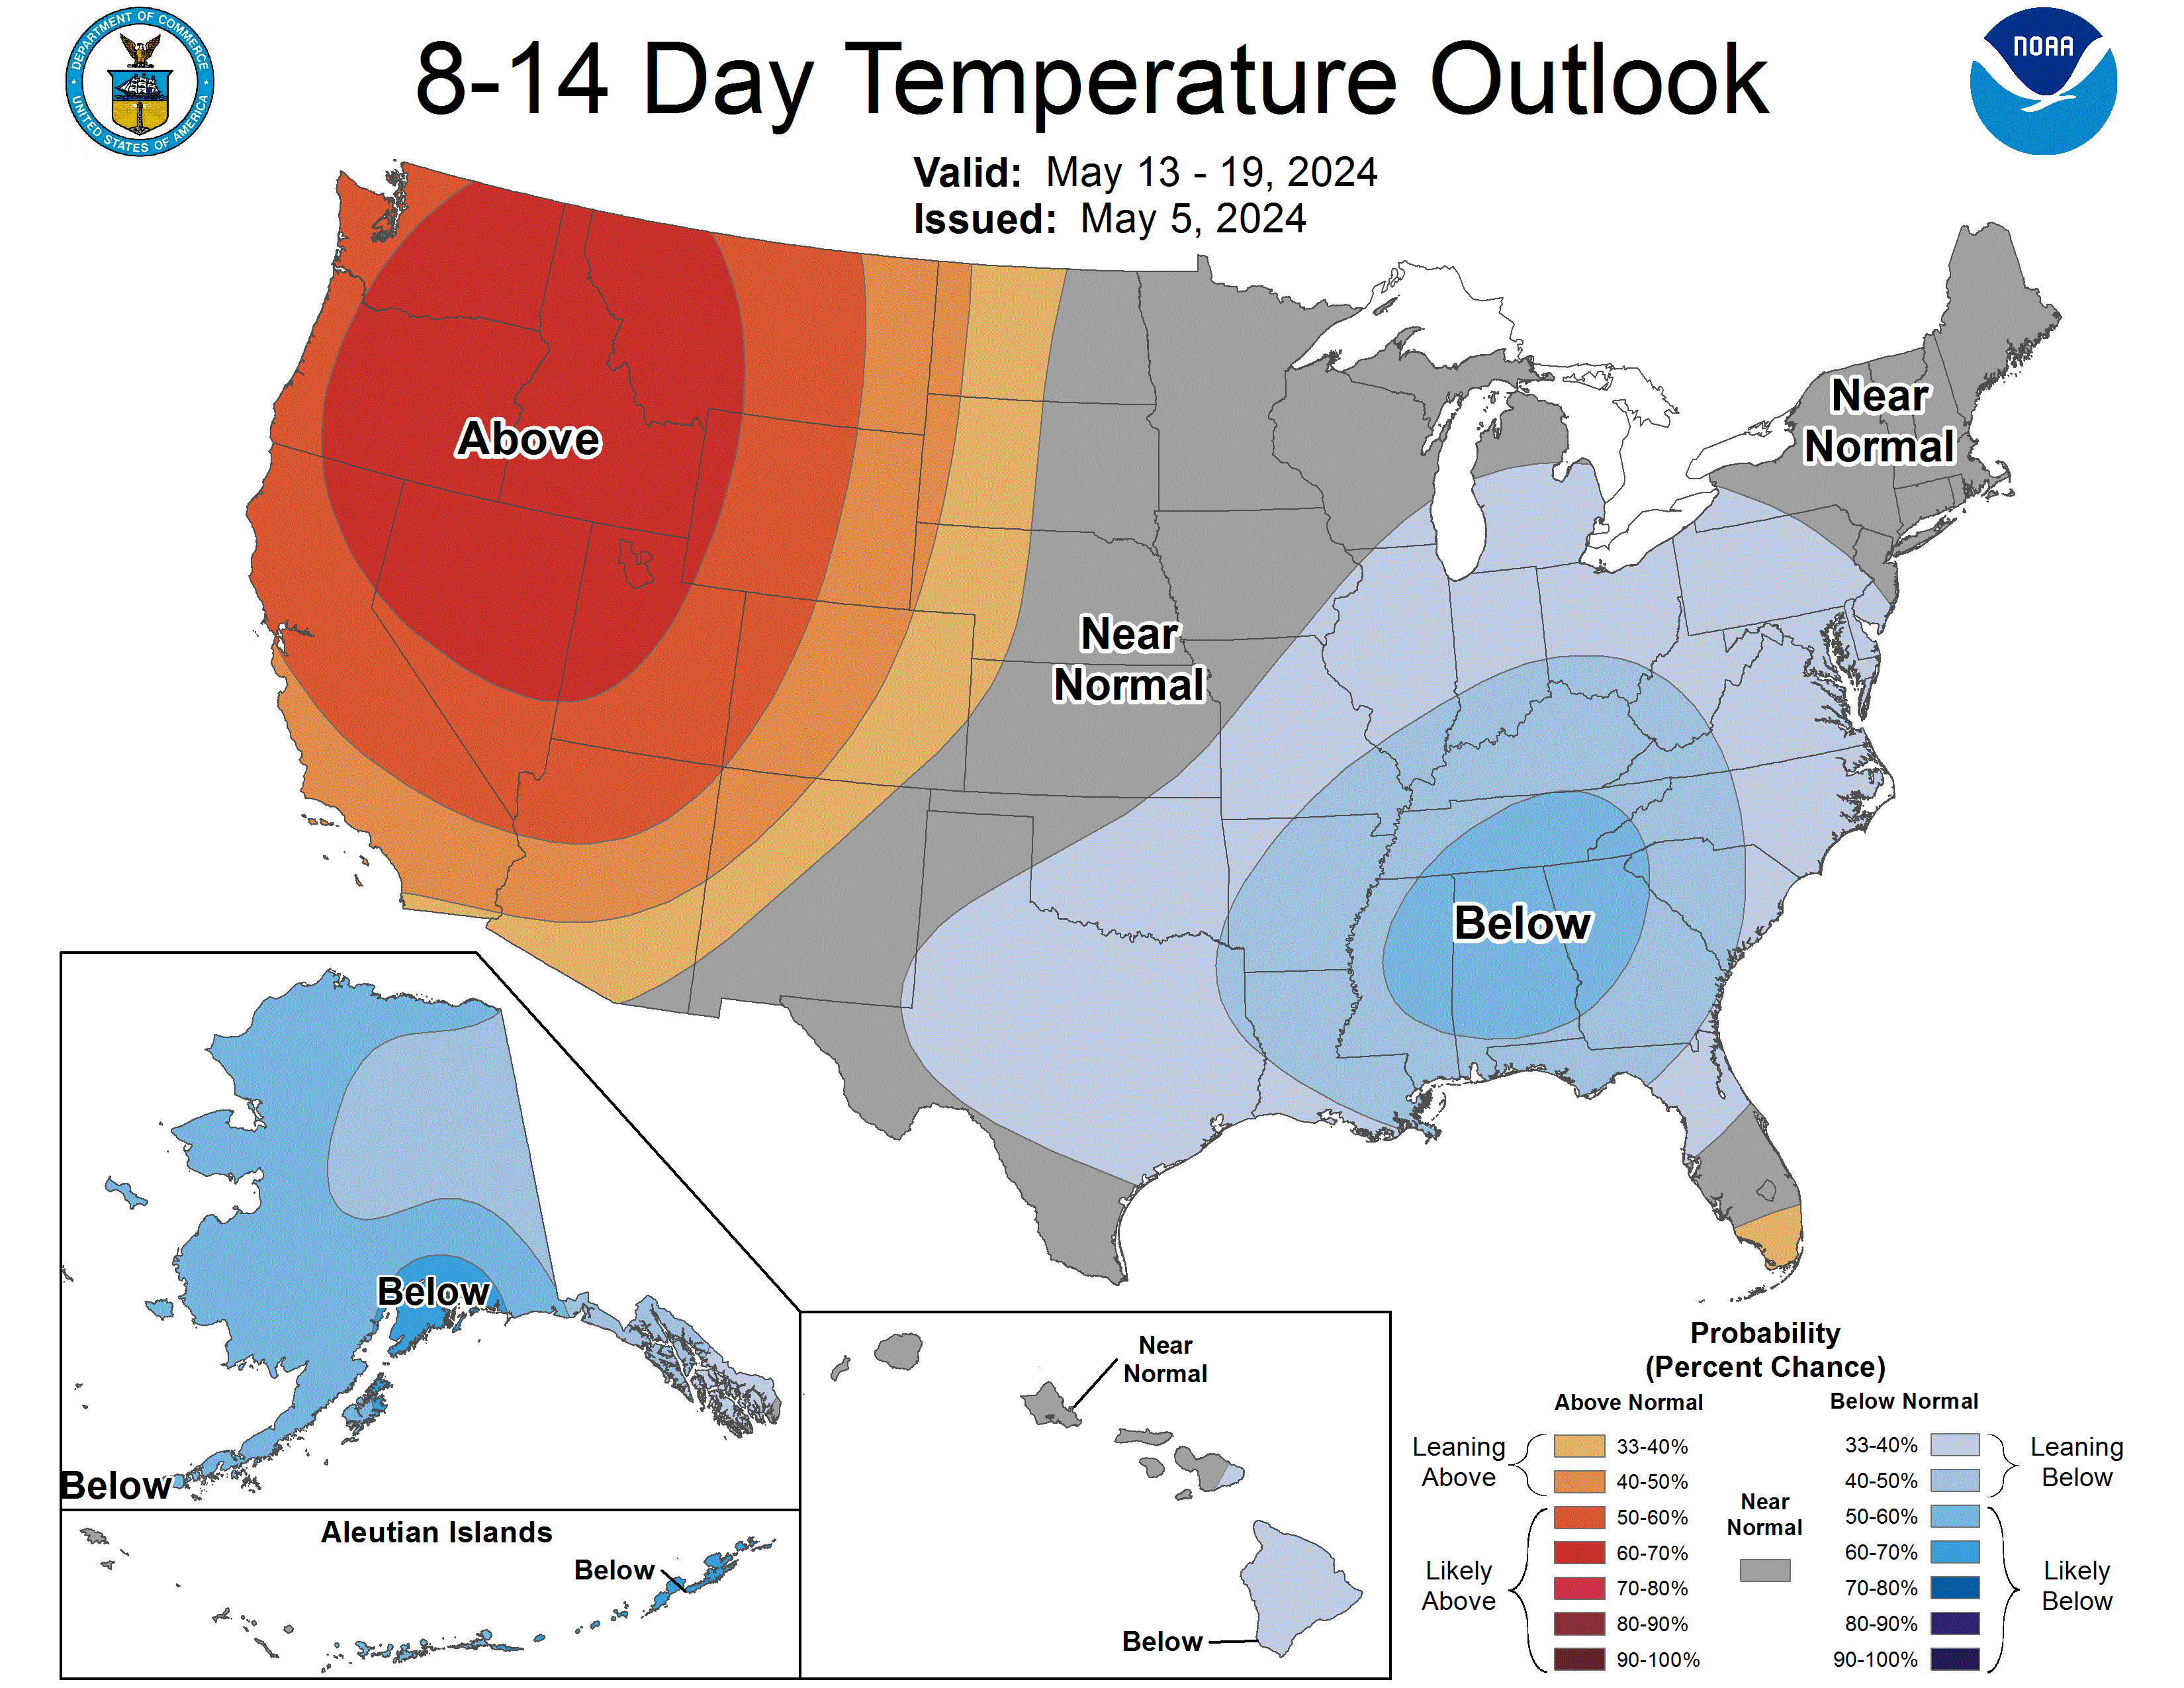 8-14 Day Temp Outlook